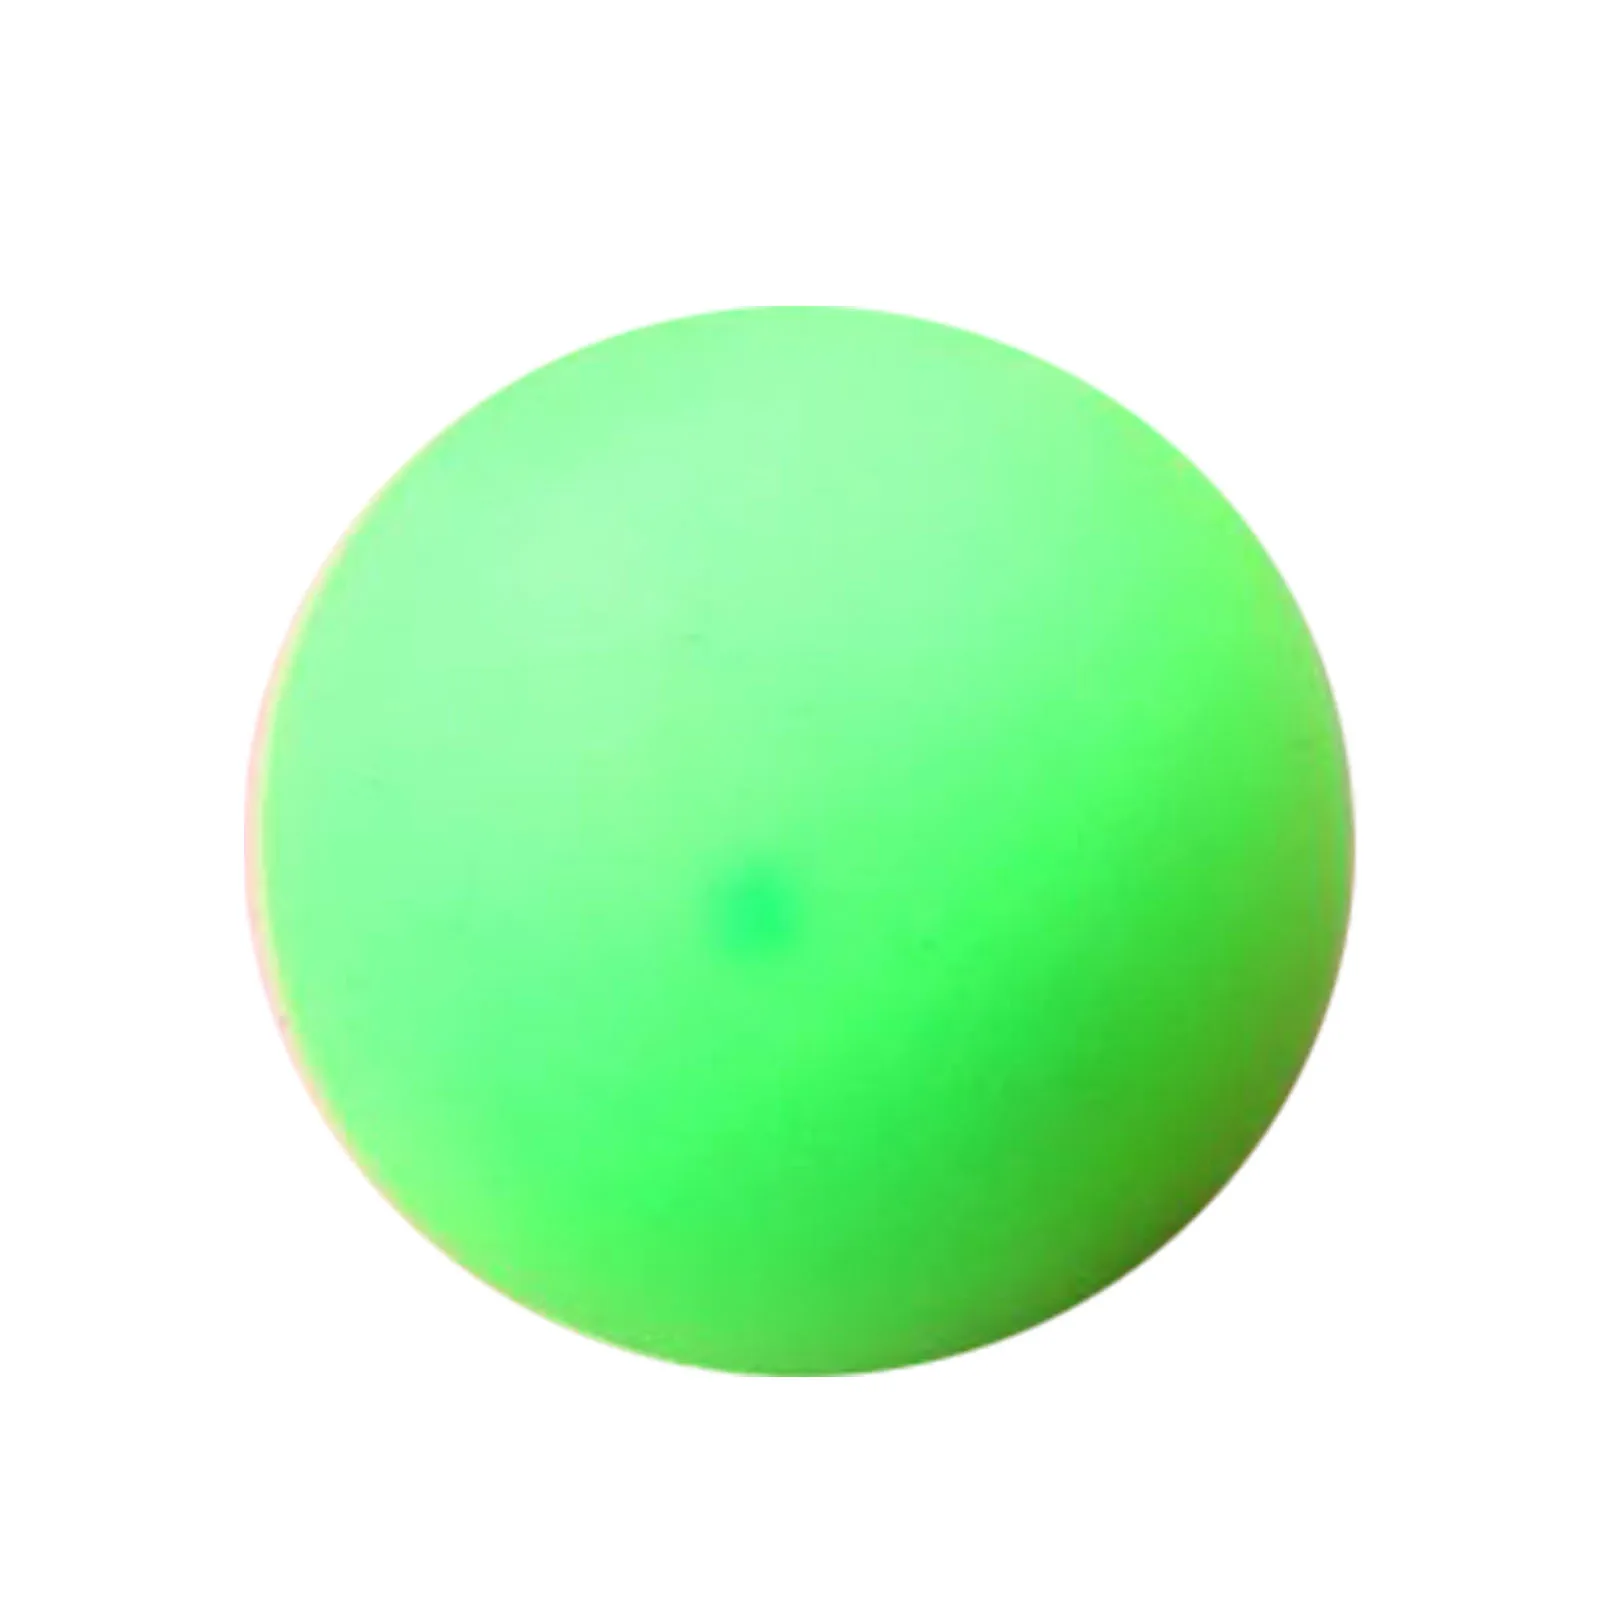 

Round Ball Anti Stress Squeeze Sensory Toys Super Soft Anti Stress Squeeze Sensory Toys for Relieving Stress from Working